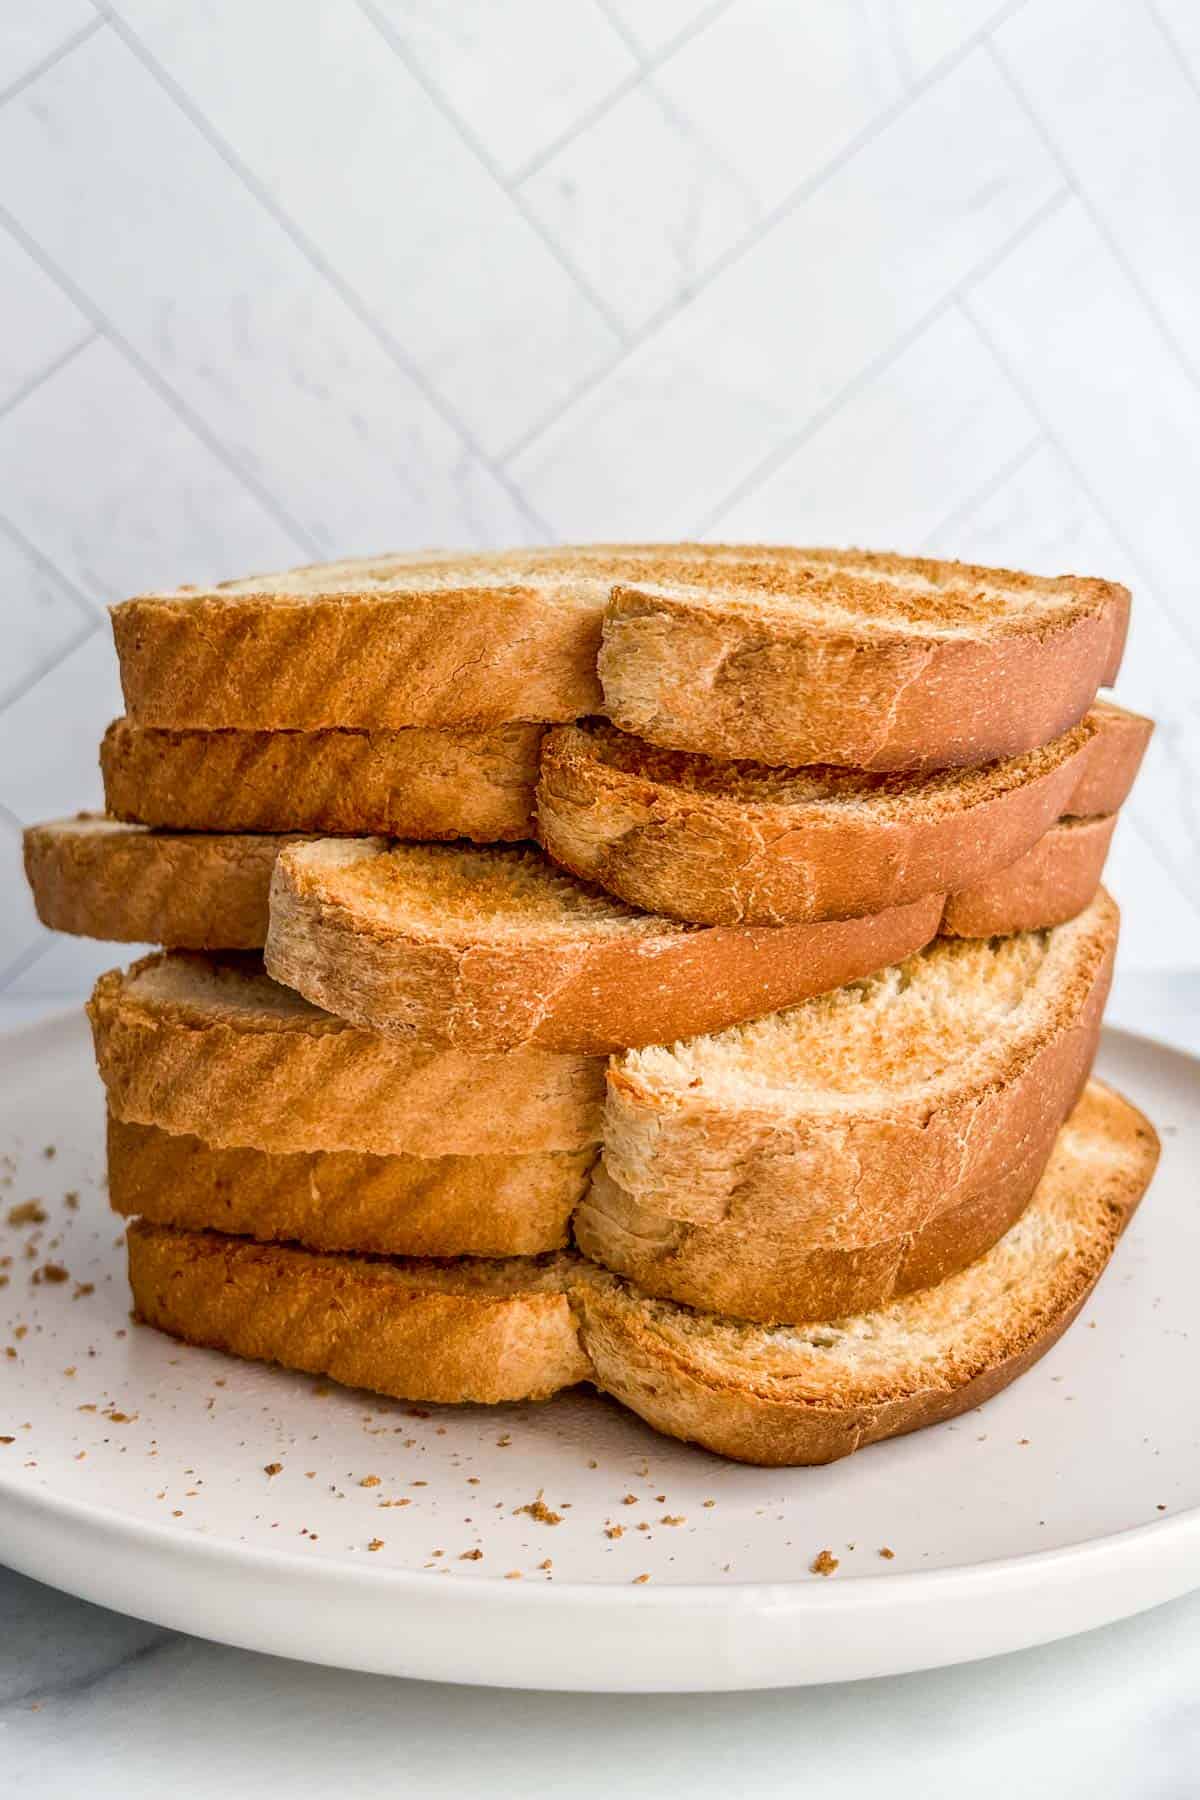 A stack of toasted bread on a white plate.